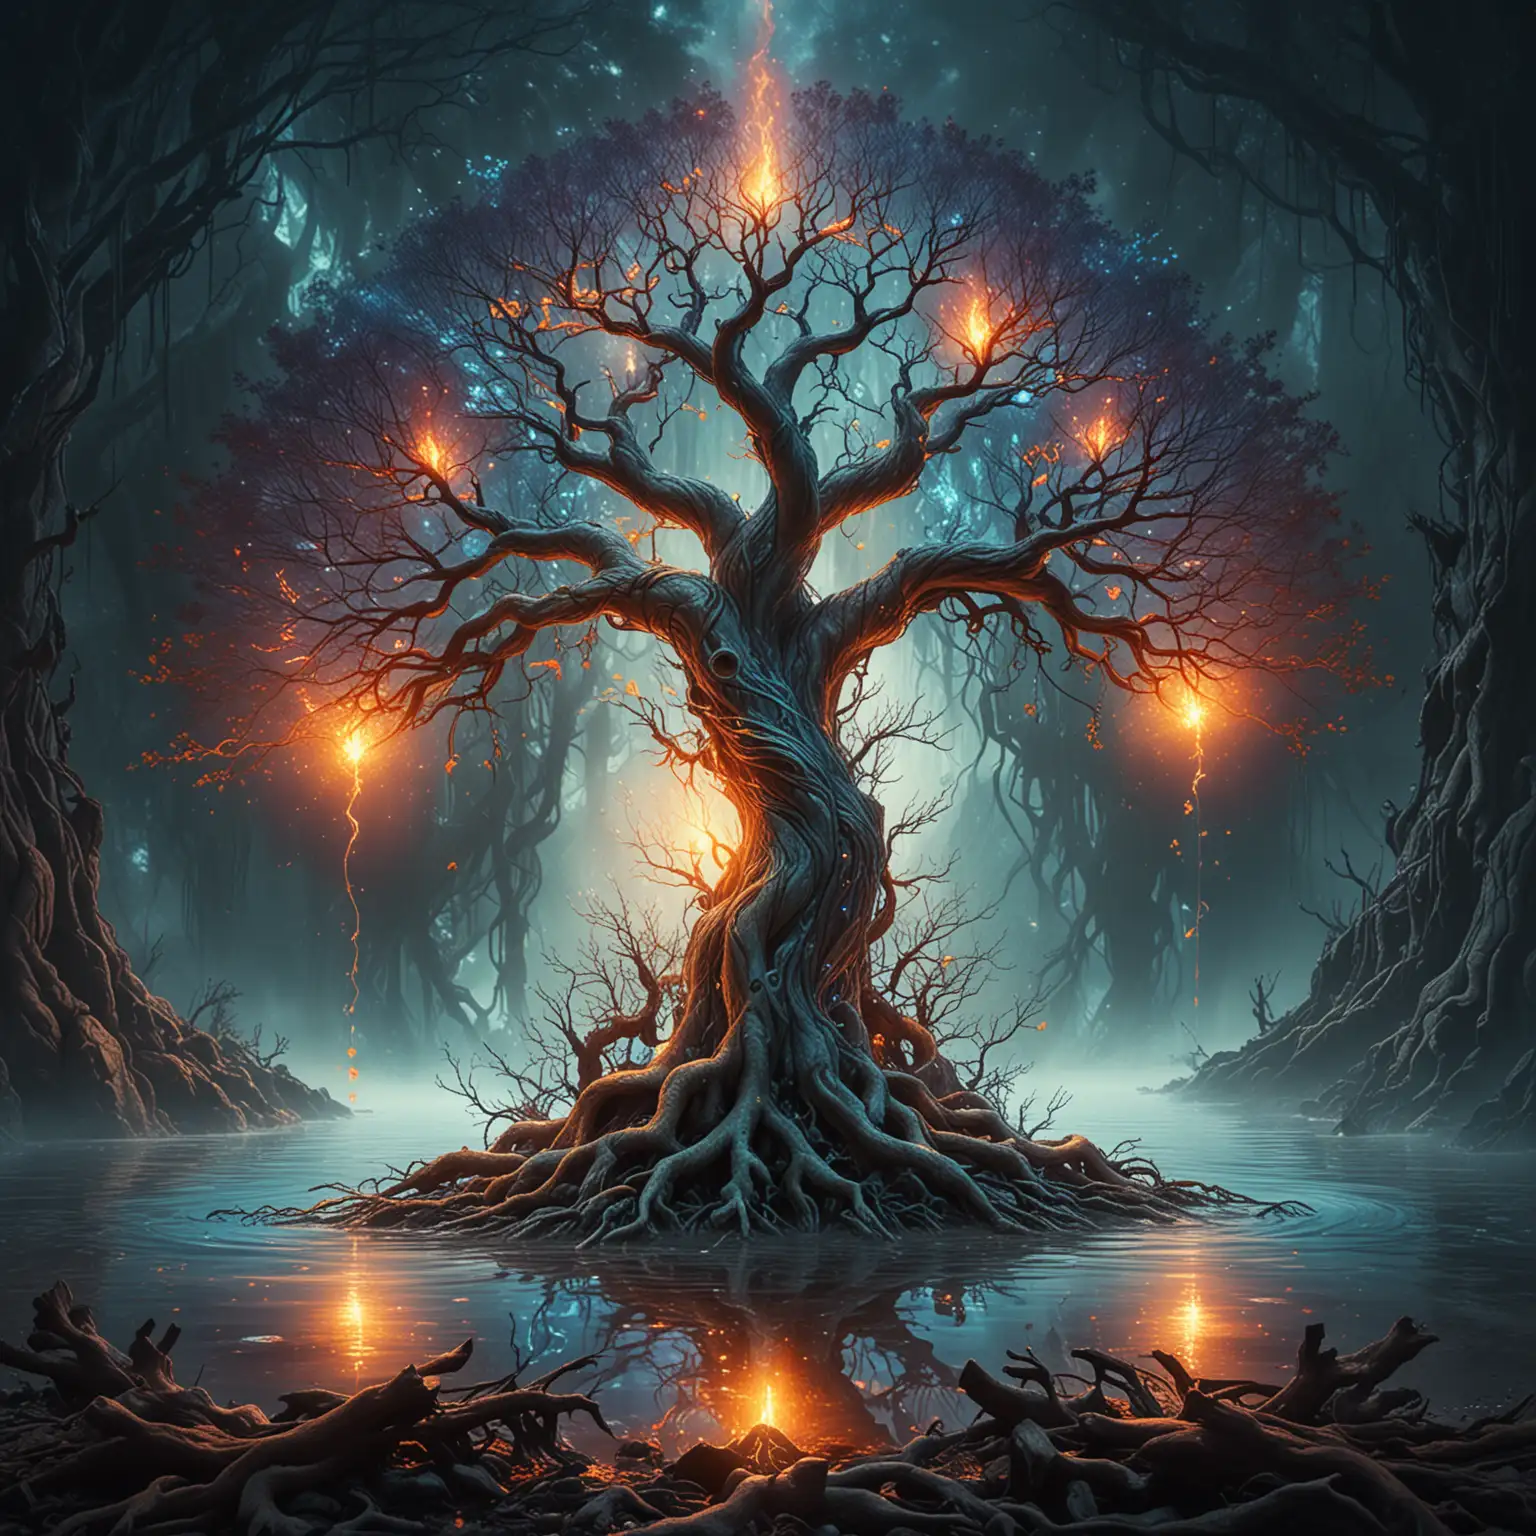 Elemental Fantasy World Tree with Fire and Water Roots and Alternate Realities in Branches